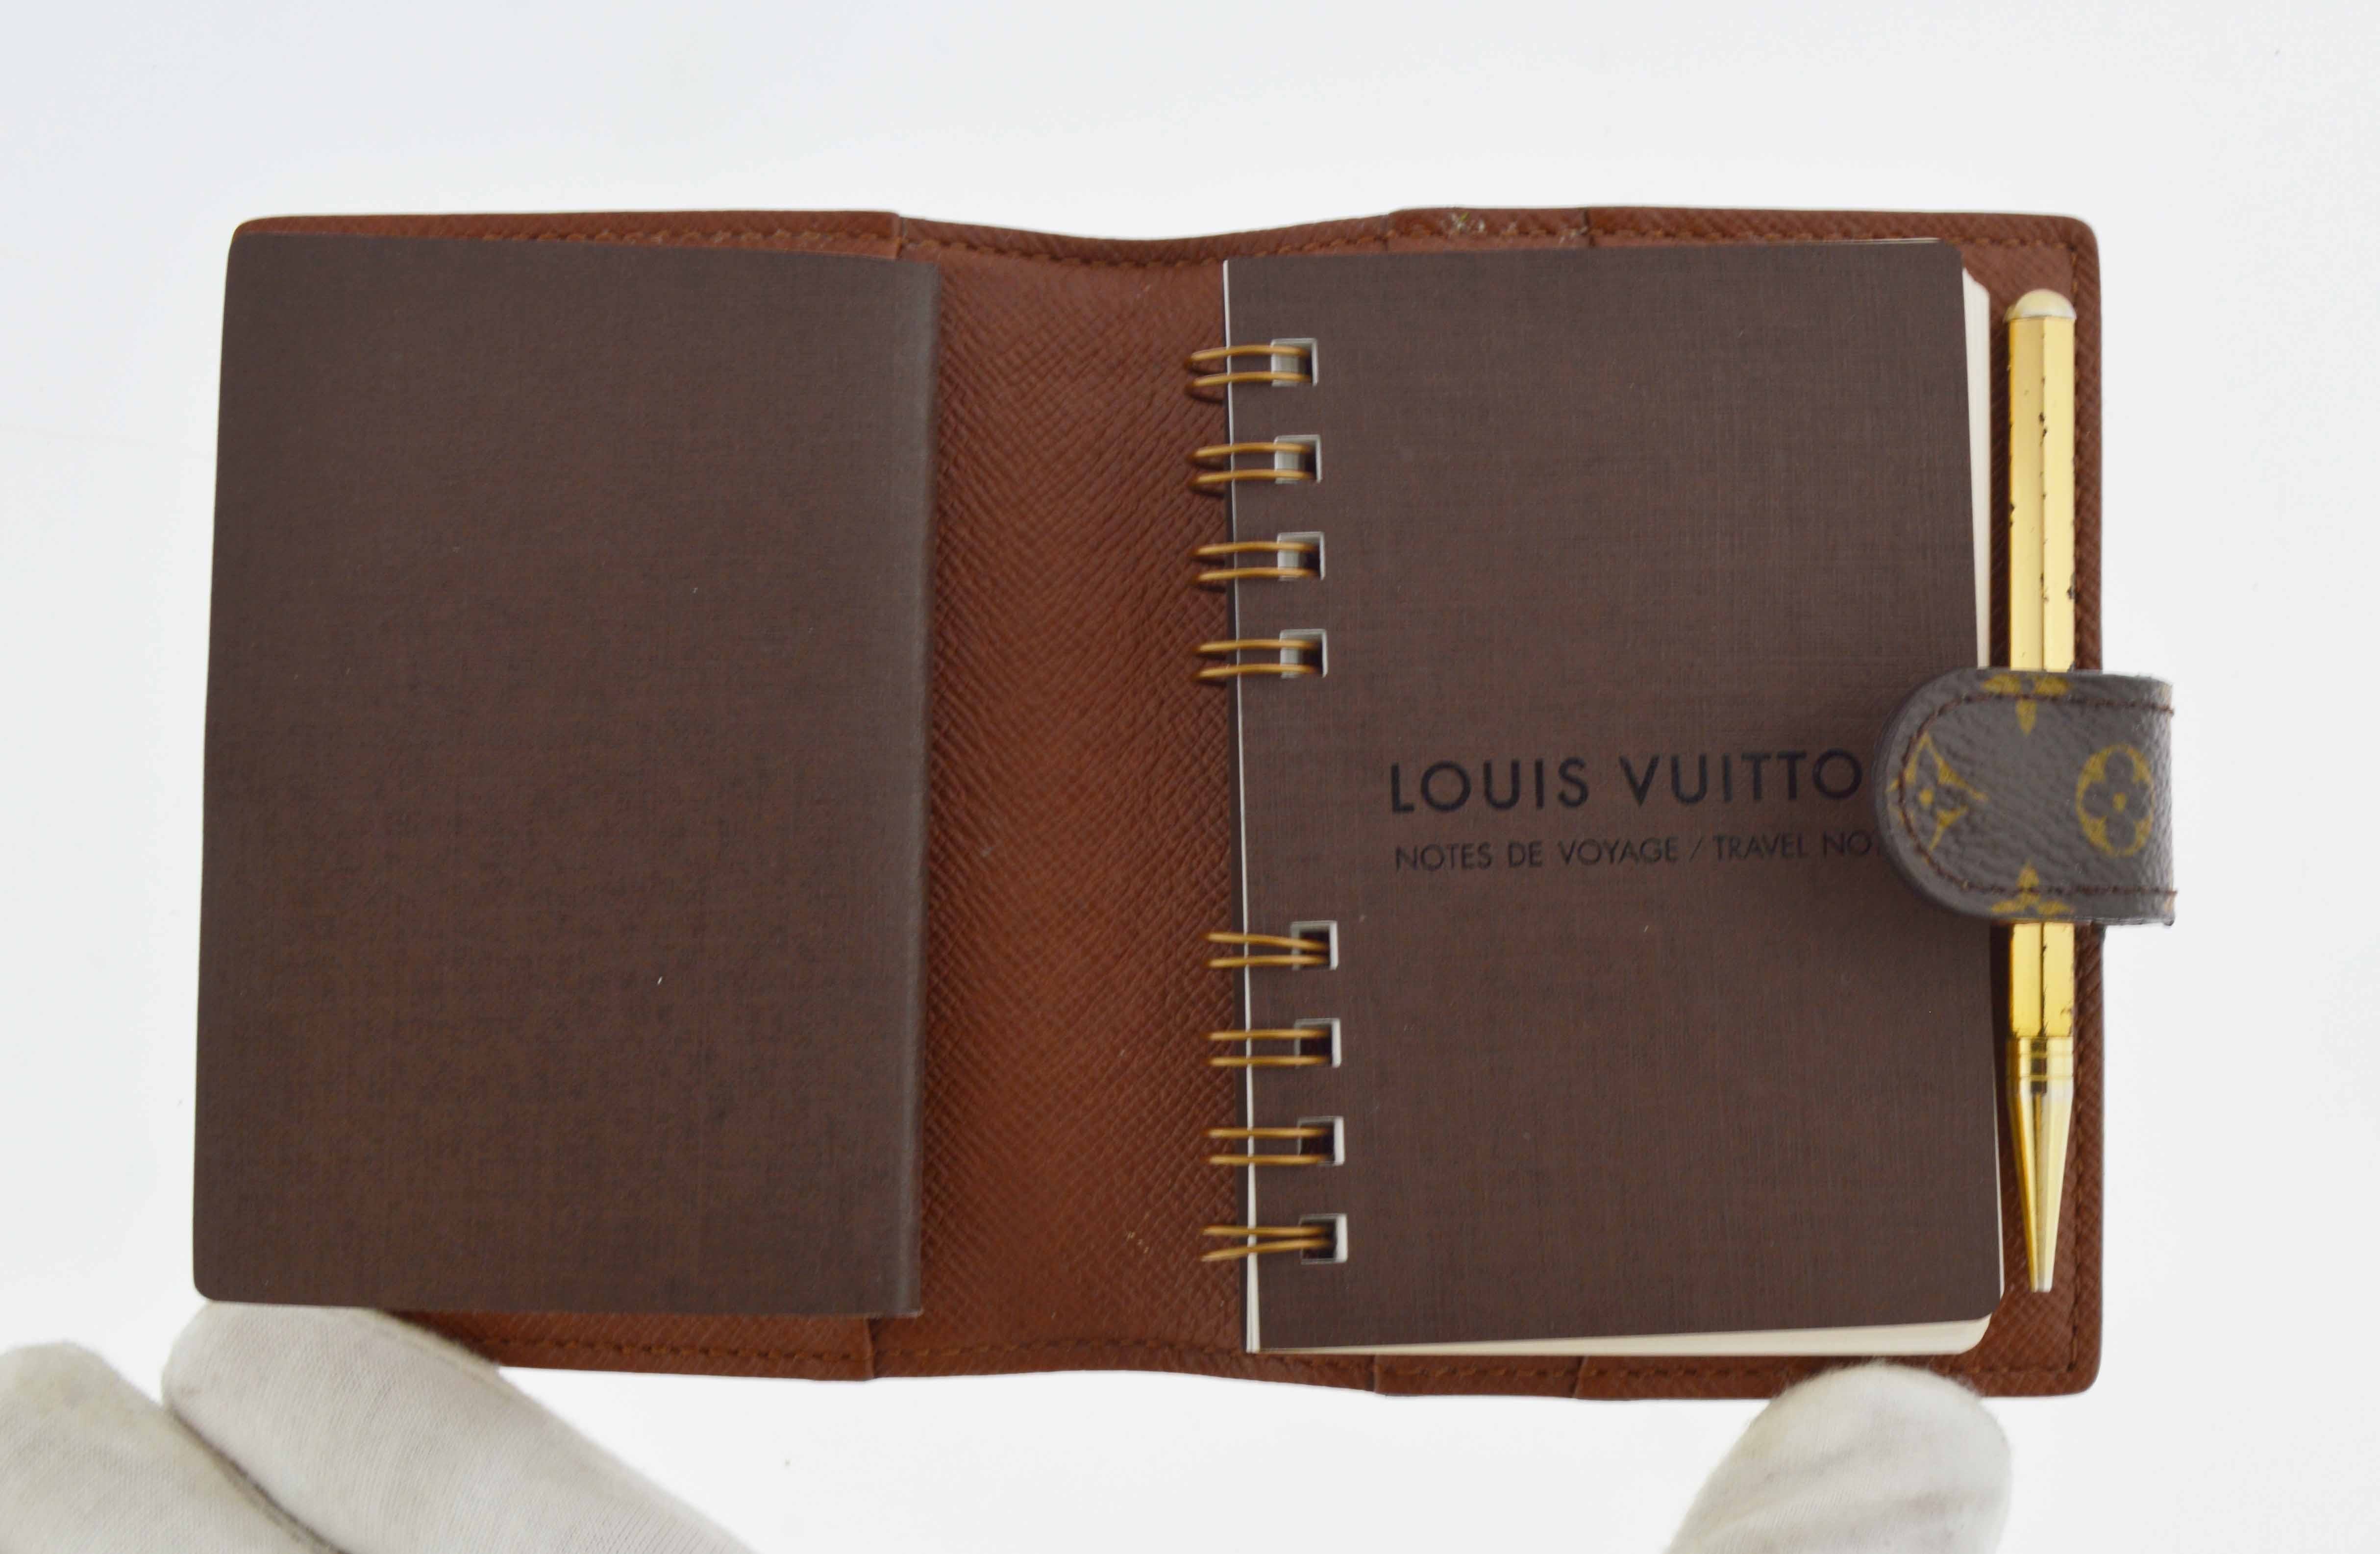 No Box Authentic Louis Vuitton Playing Cards